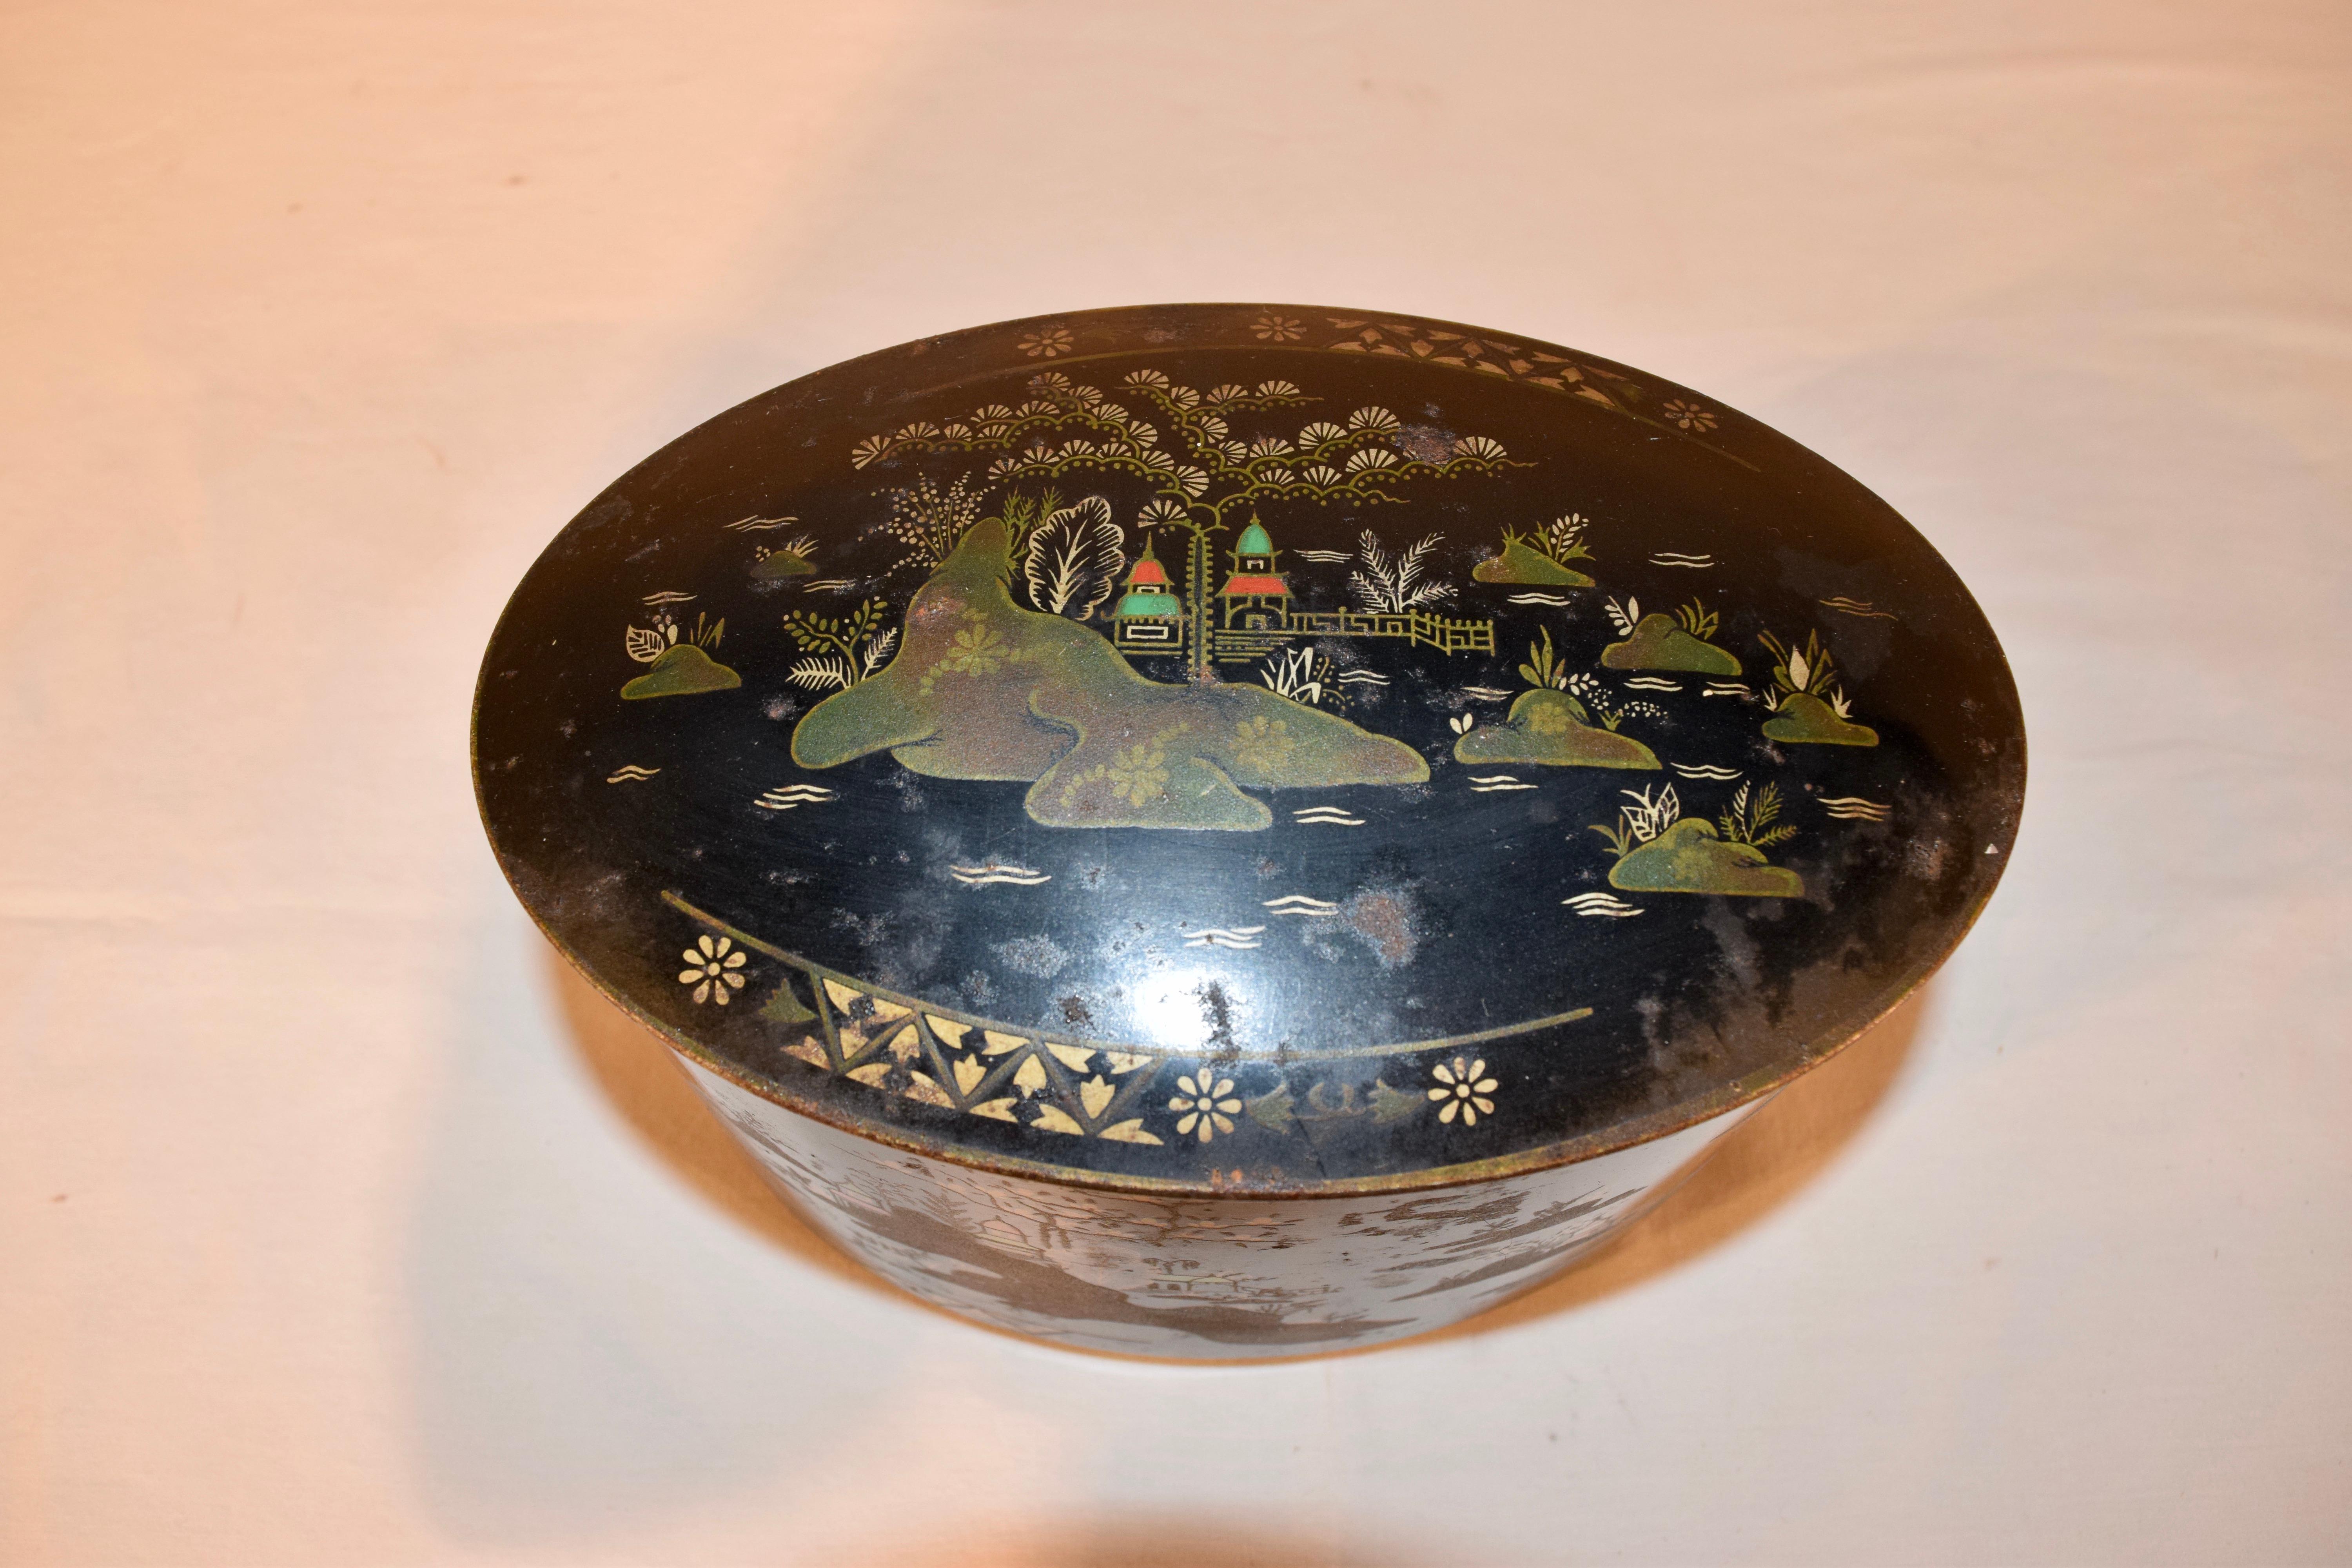 Painted Late 19th Century Chinoiserie Tea Tin For Sale